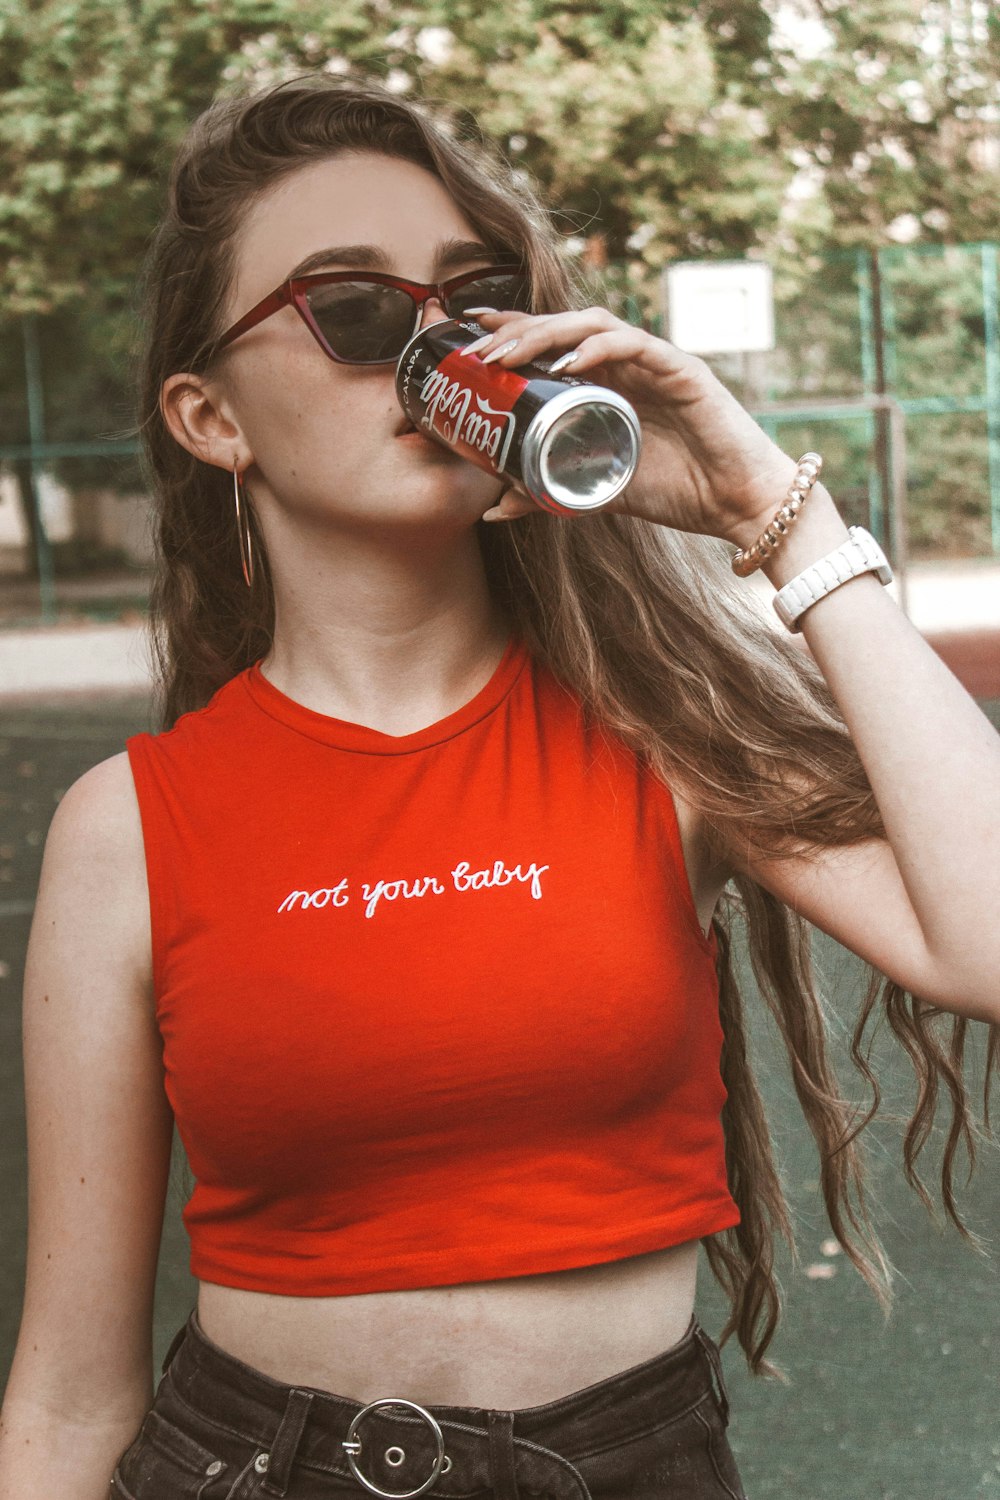 woman about to drink Coca-Cola soda